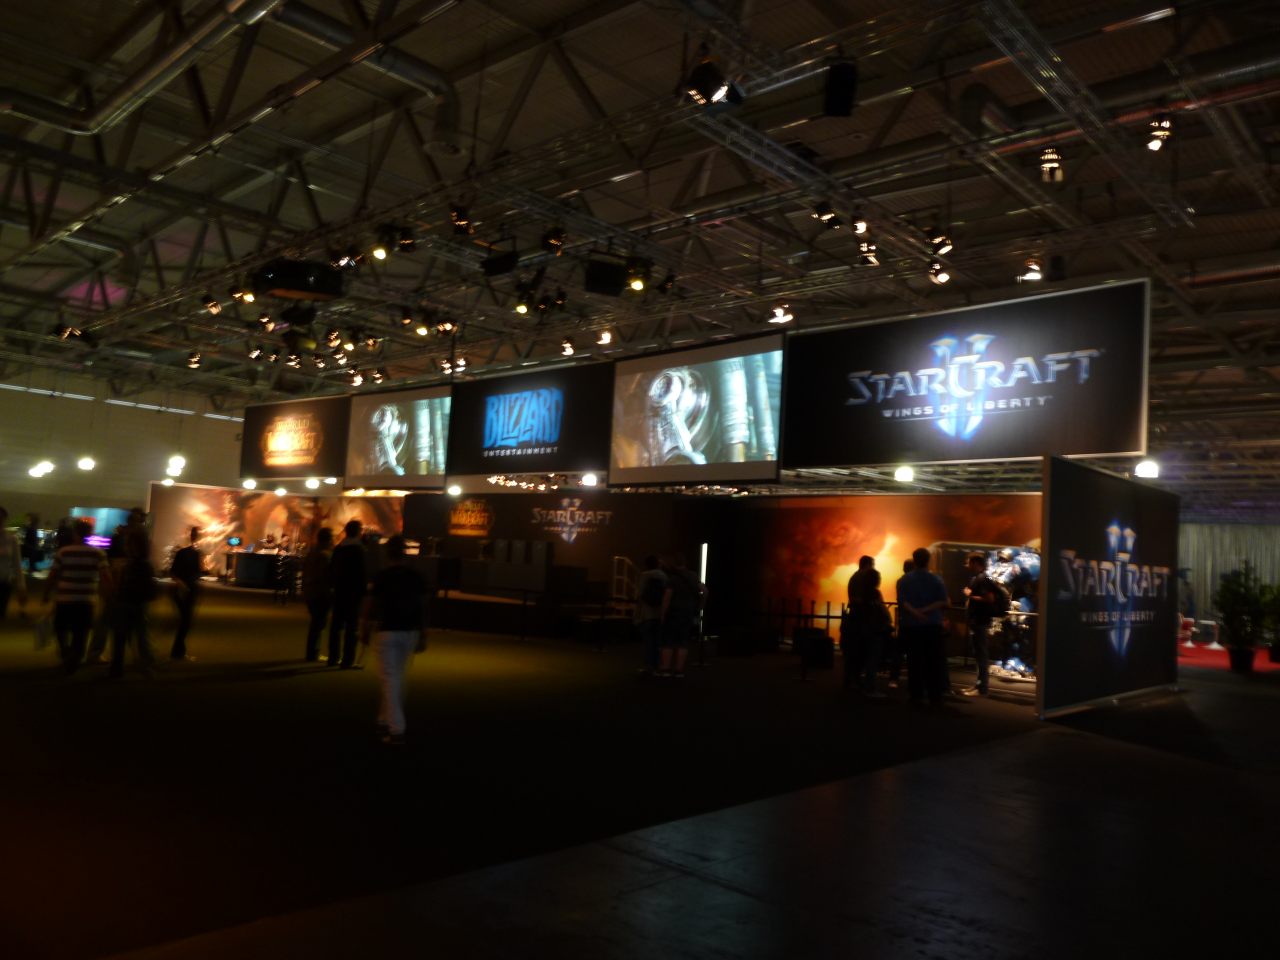 Blizz Booth